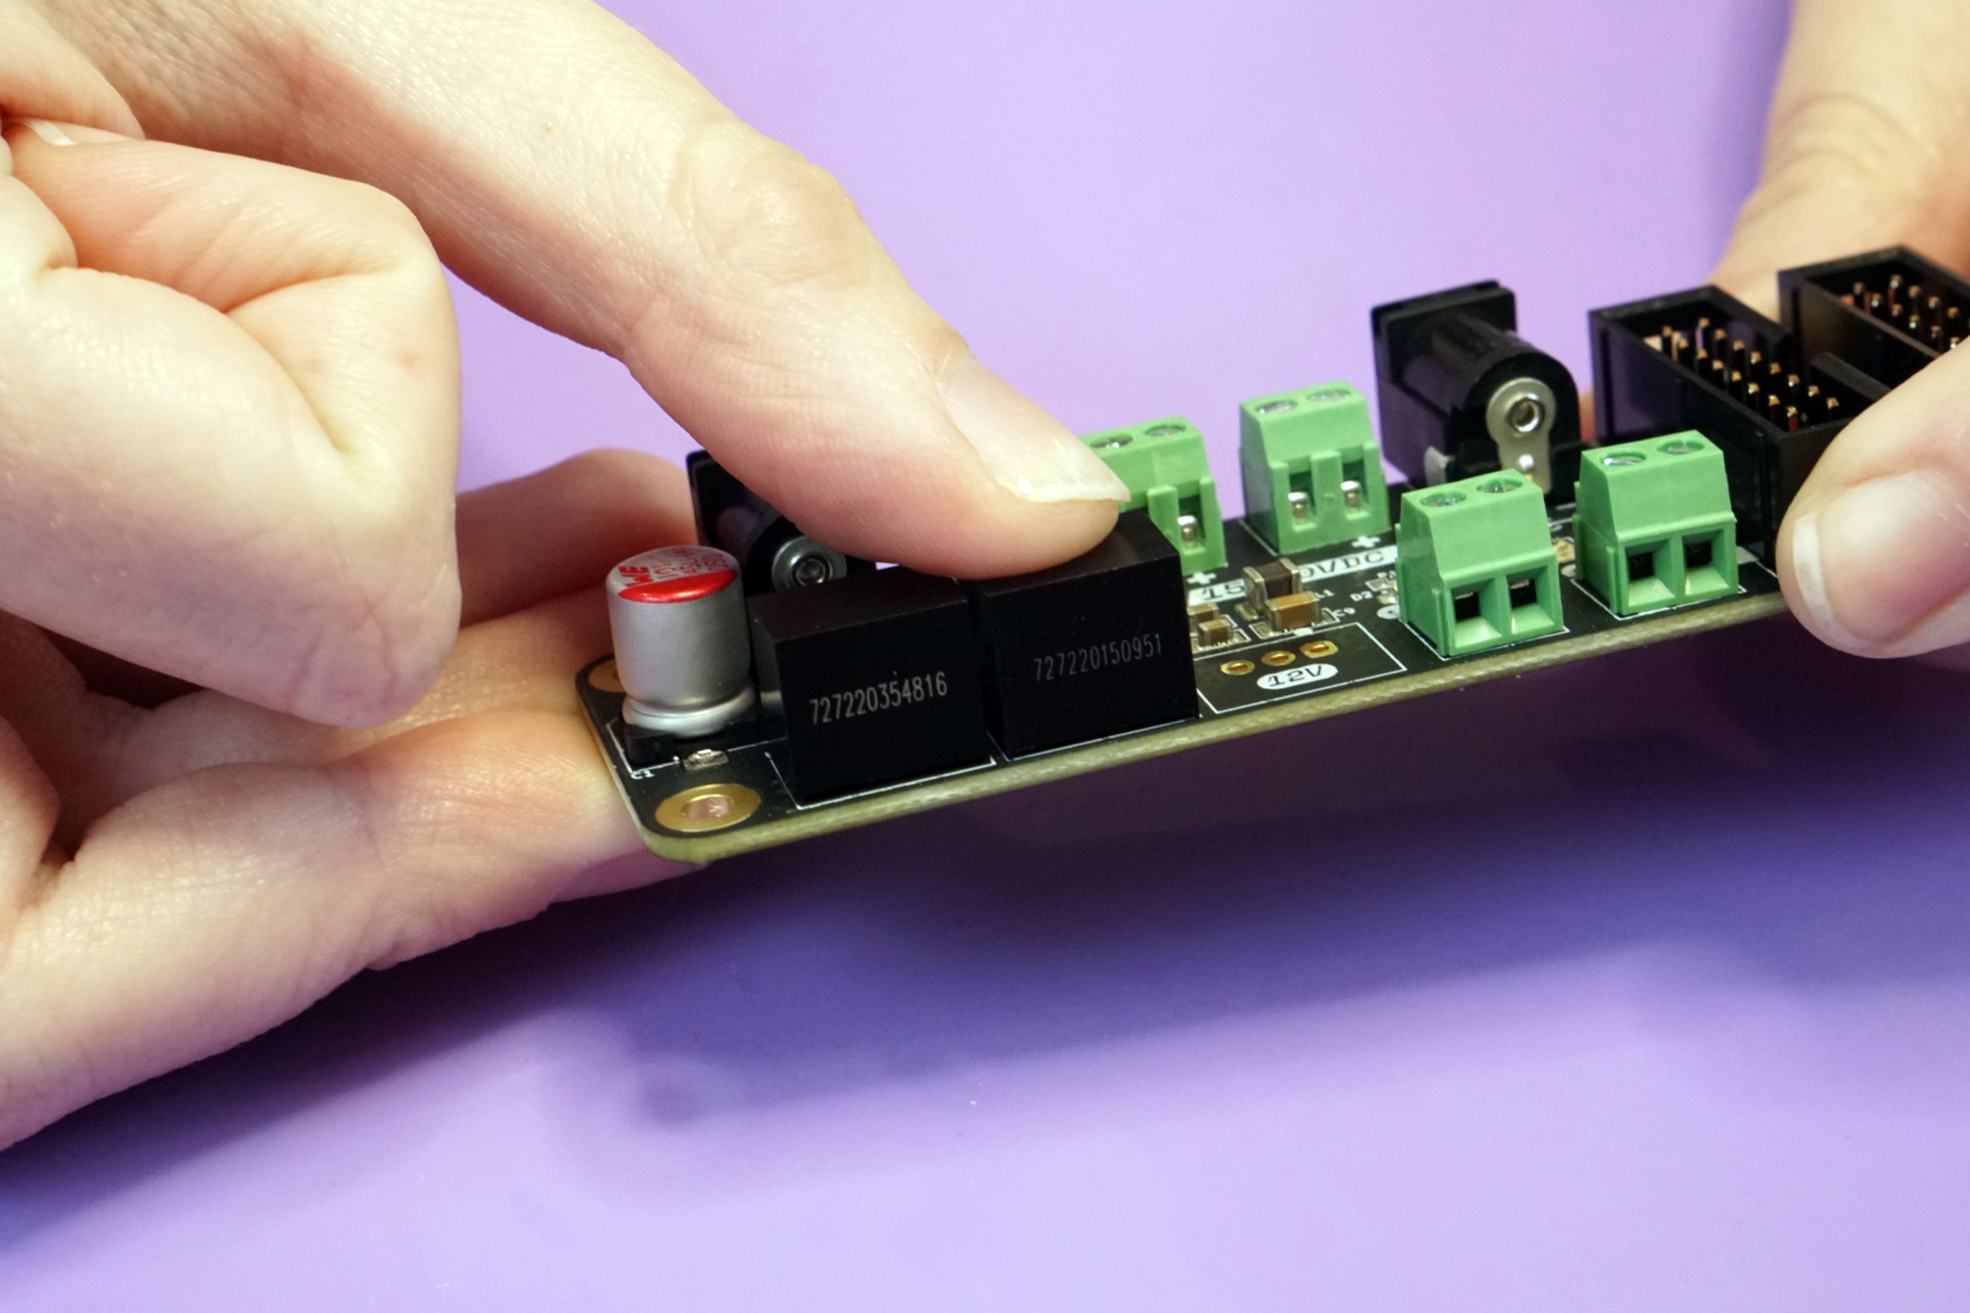 Photo of one of the 12V converters placed on the board